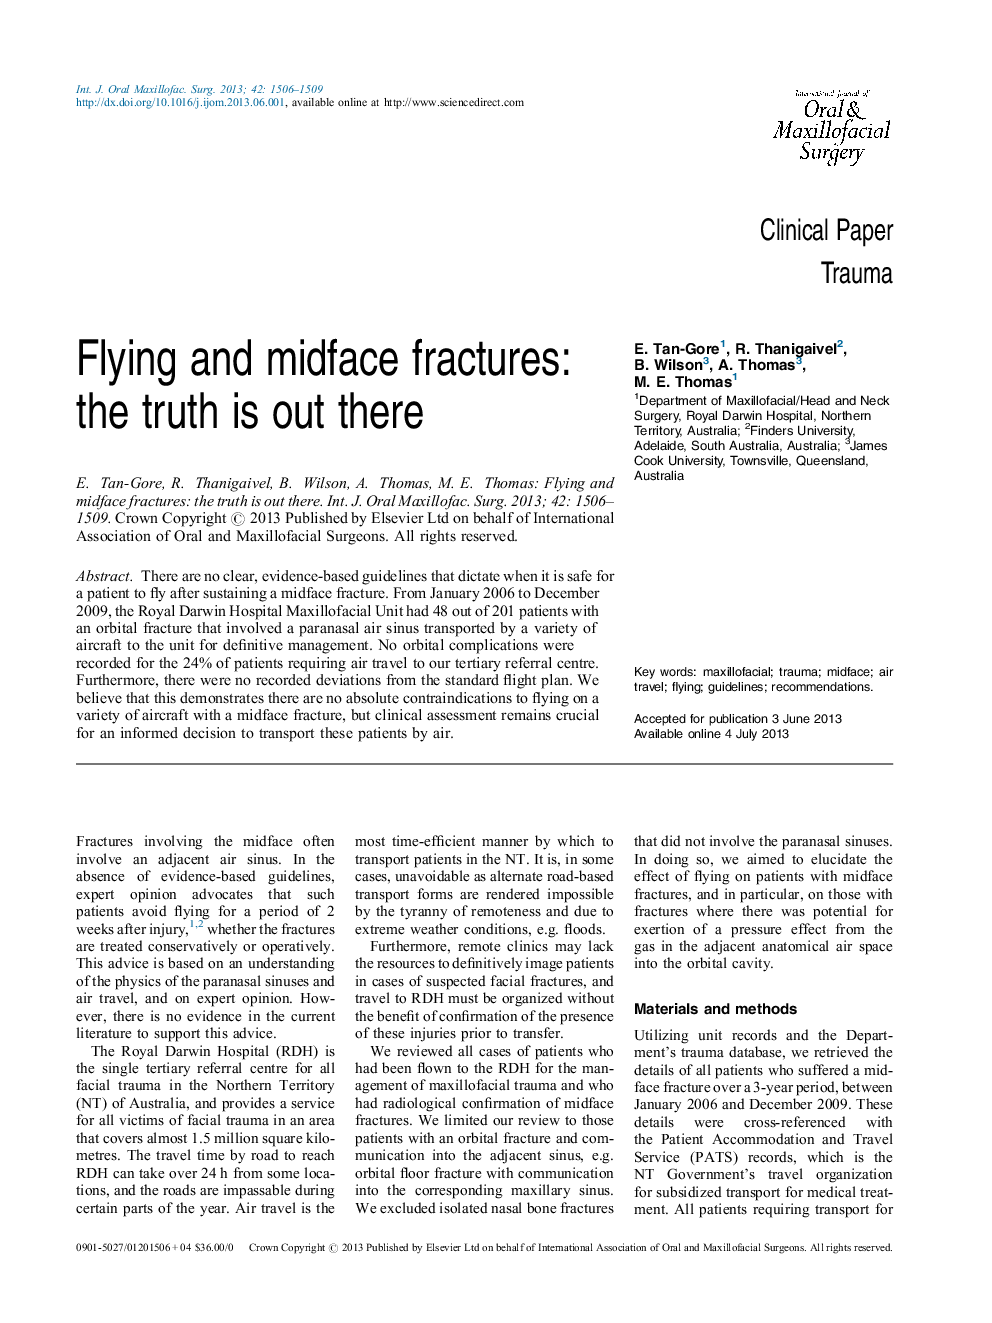 Flying and midface fractures: the truth is out there